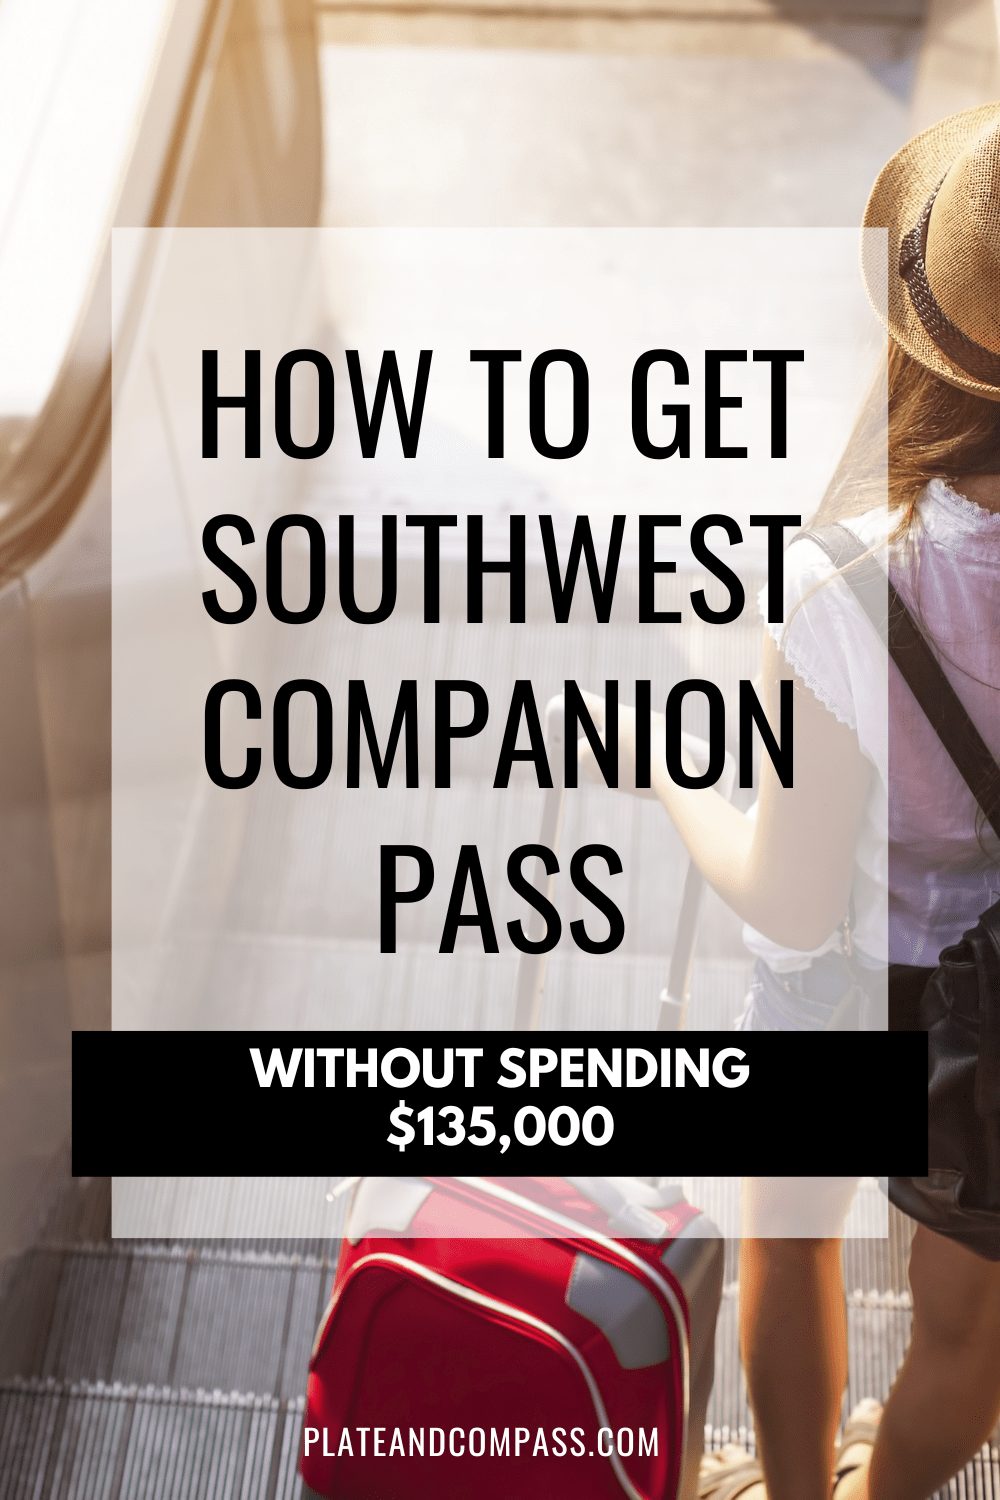 Woman at airport with luggage and text stating "how to get southwest companion pass without spending $135,000"